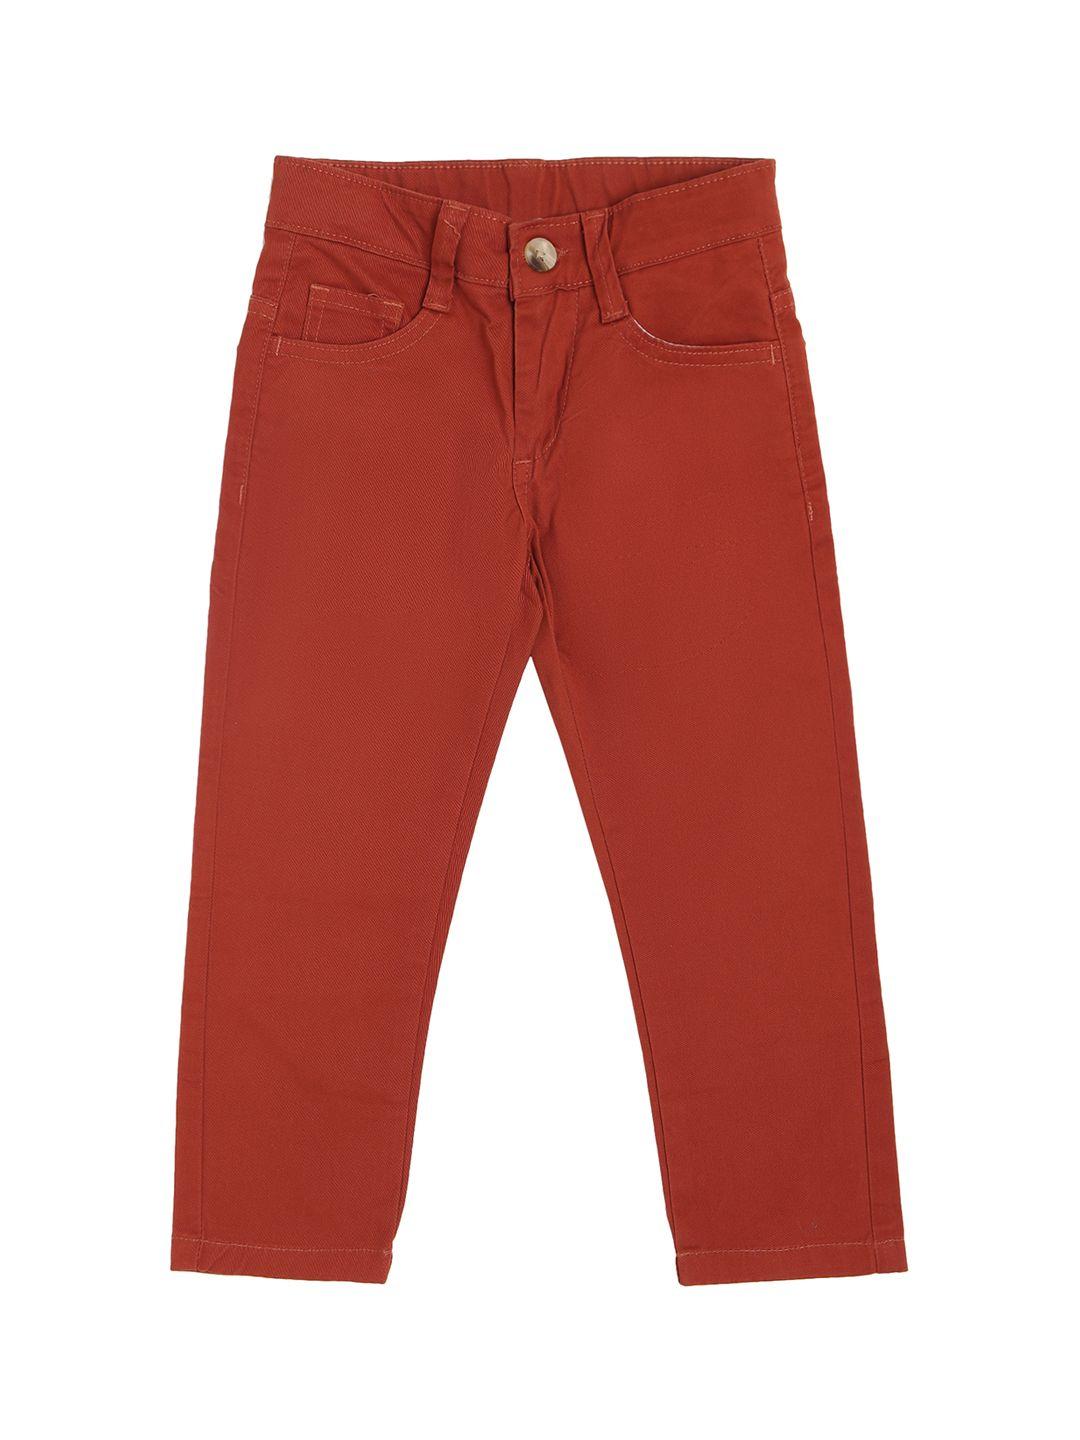 cantabil-boys-cotton-chinos-trousers